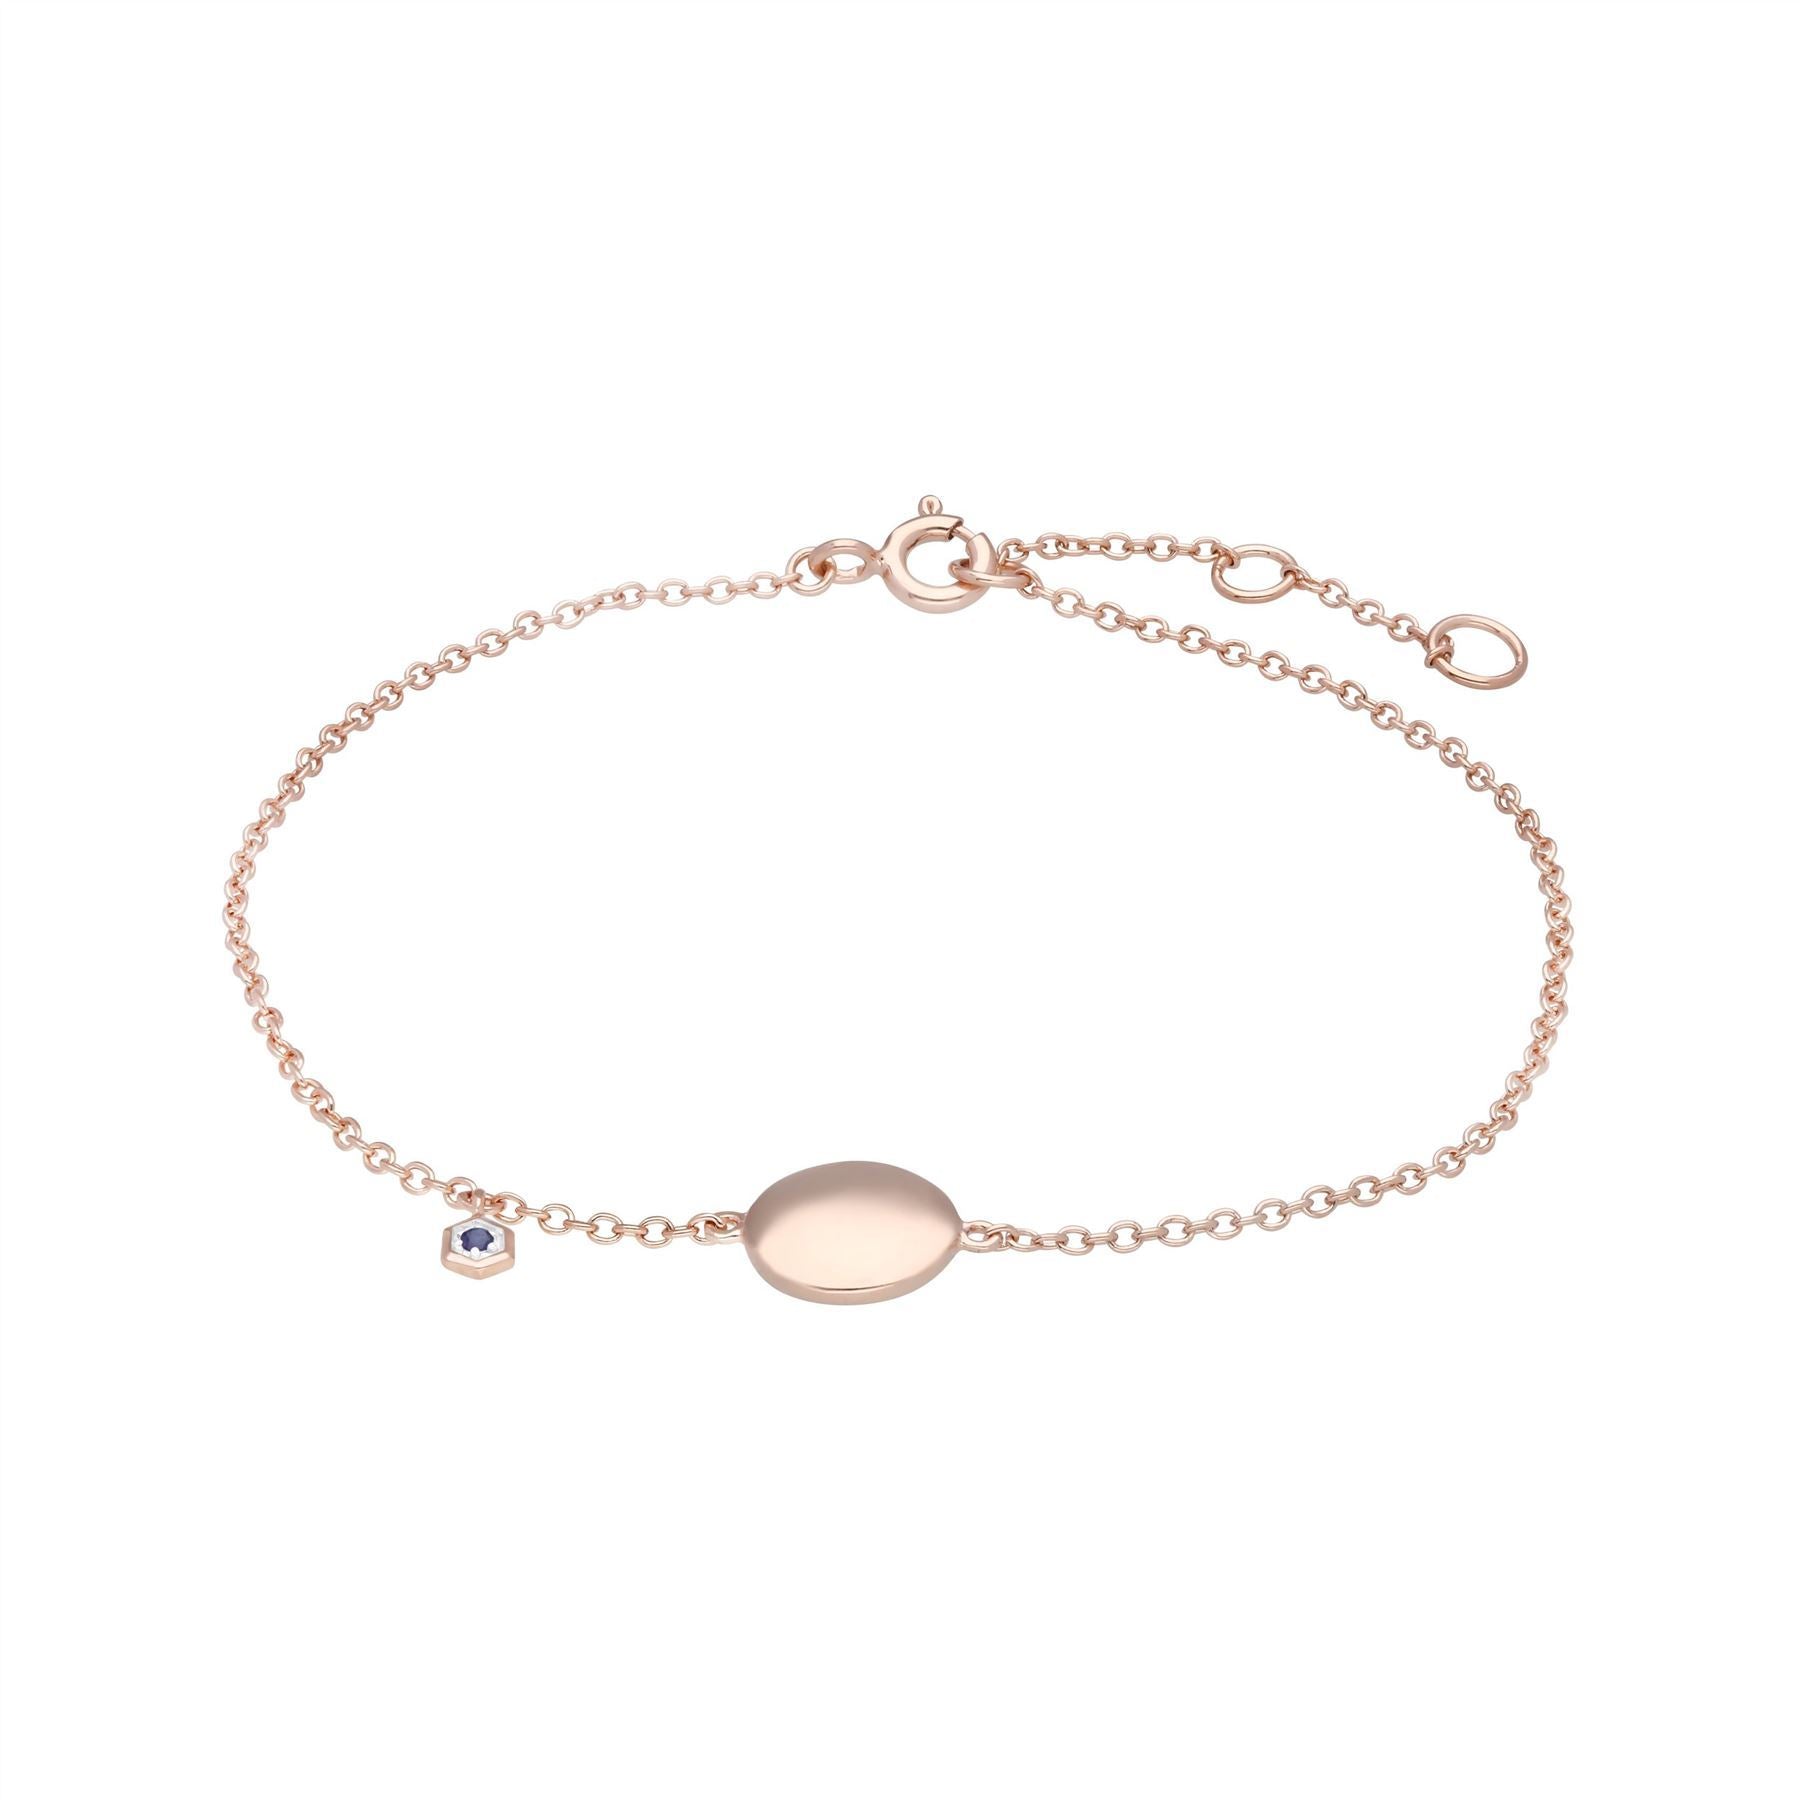 Sapphire Engravable Bracelet in Rose Gold Plated Sterling Silver